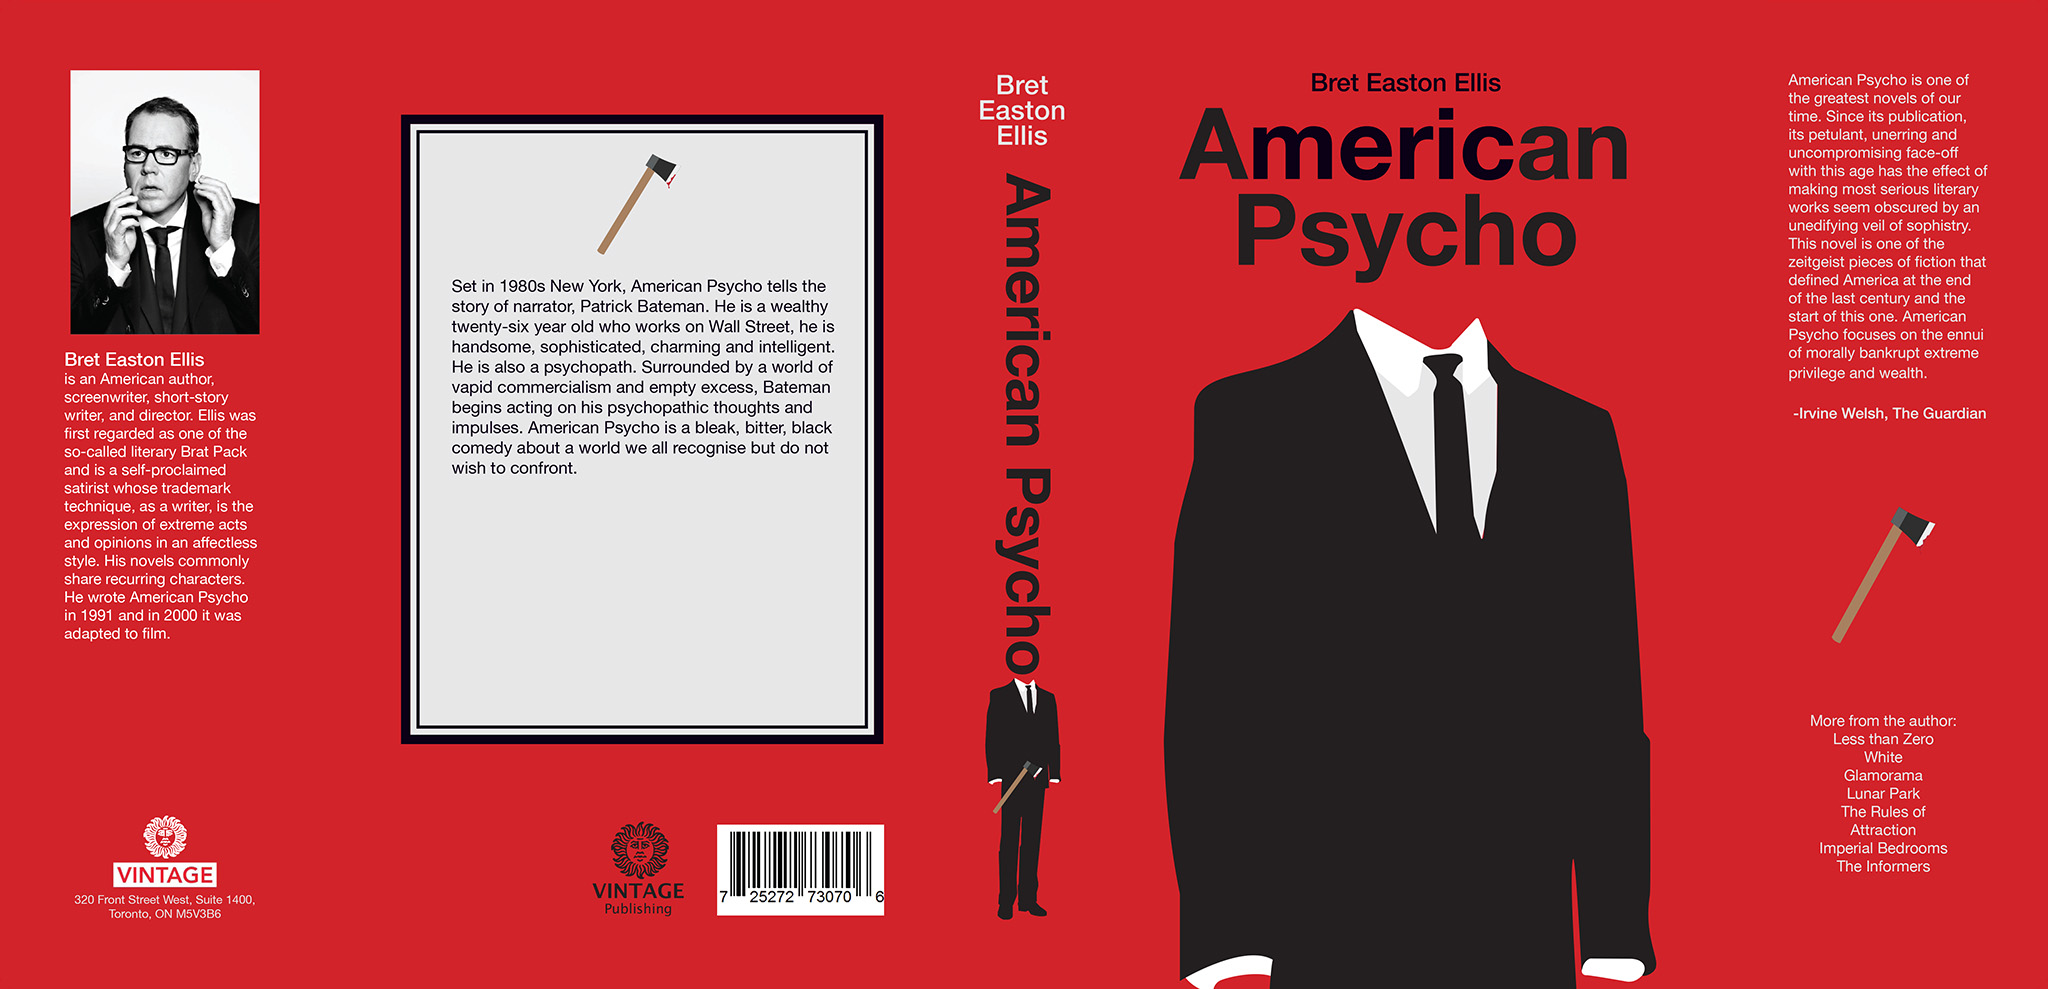 Design layout for a book cover of the book American Psycho. On the red cover there is a minimalist illustration of a suit. The spine of the book has the title and the illustration of the suit holding an axe.